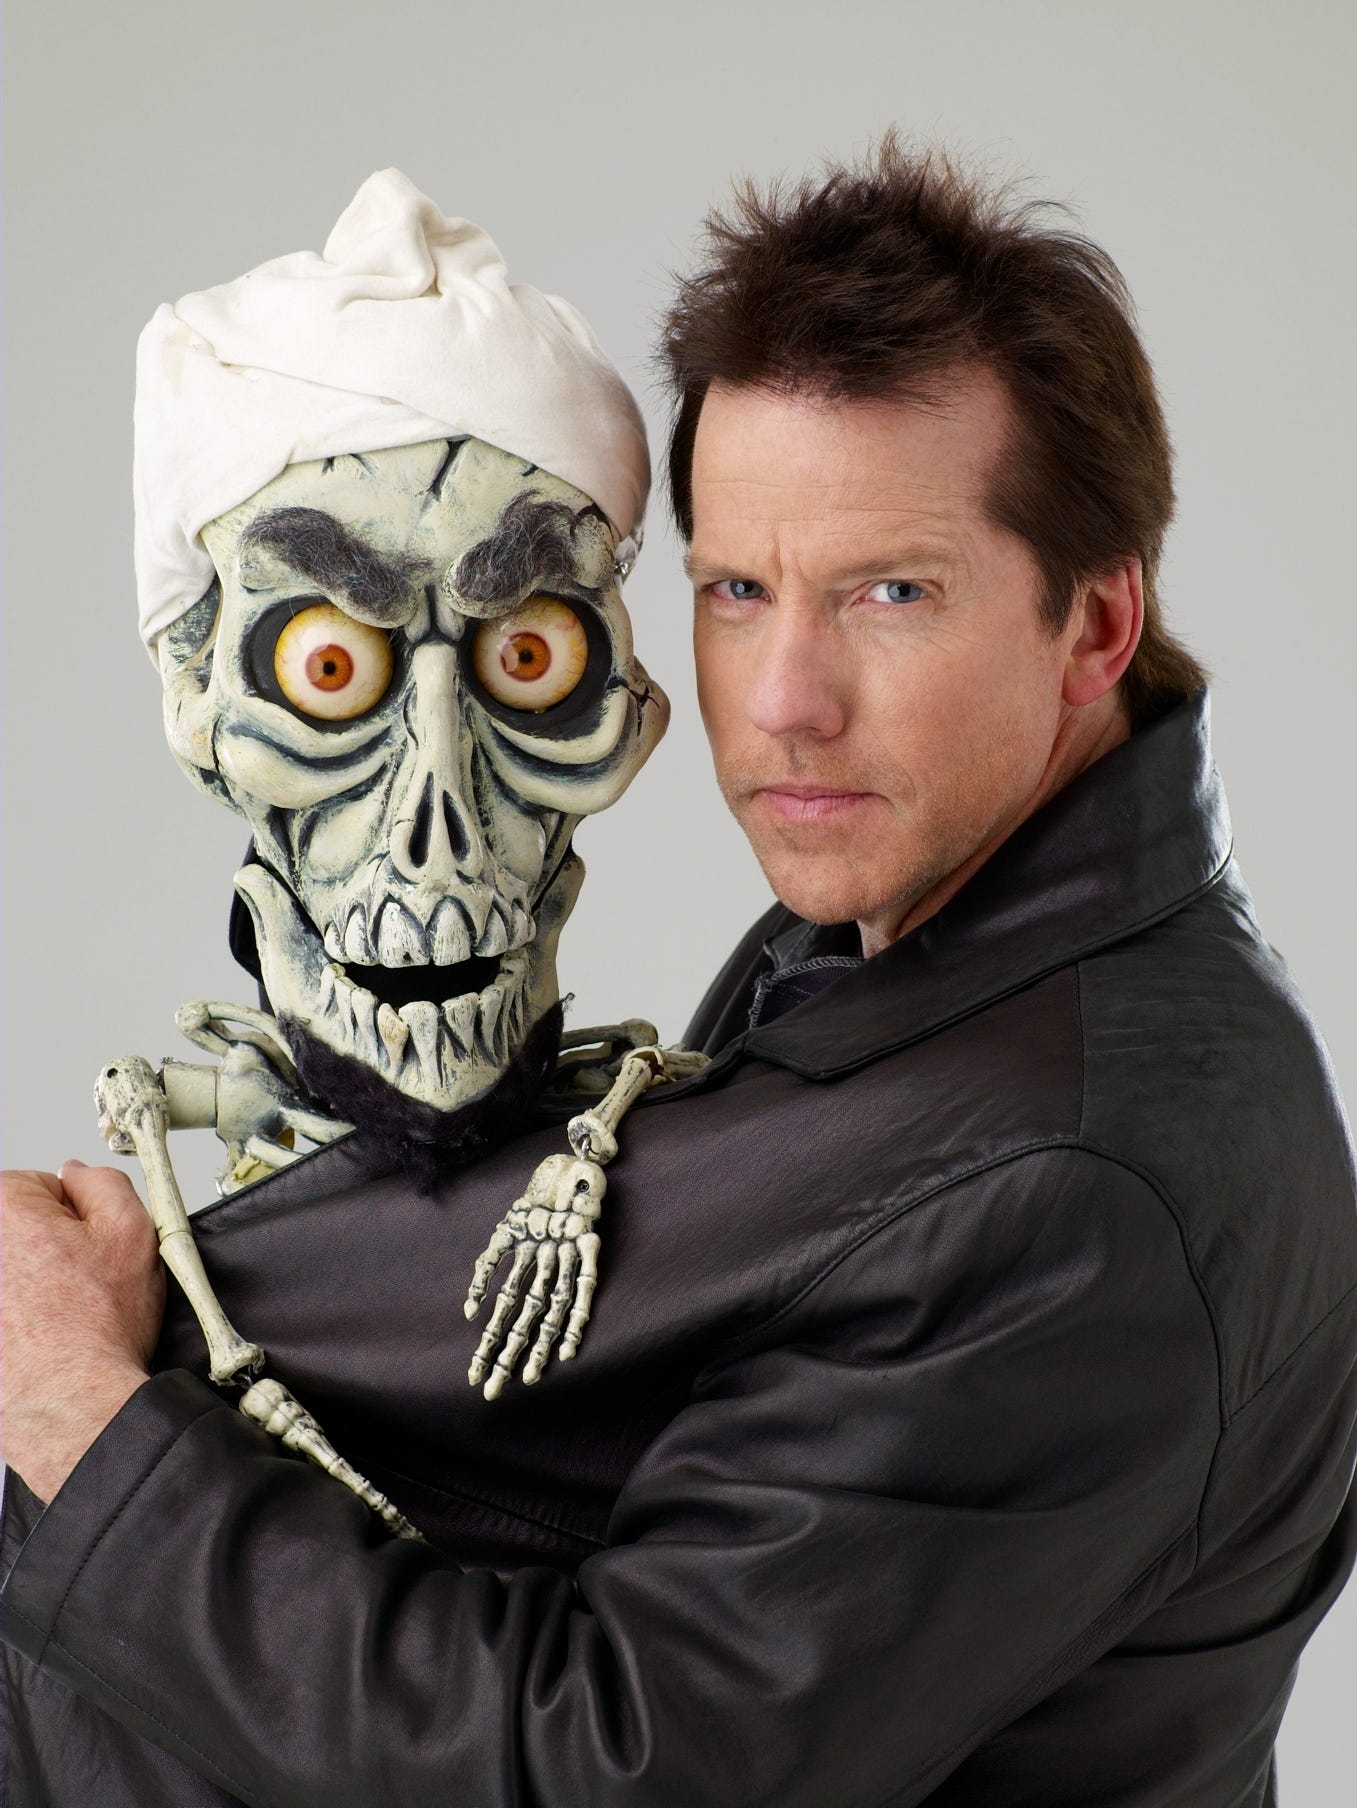 File:Jeff Dunham and Achmed.JPG - Wikipedia